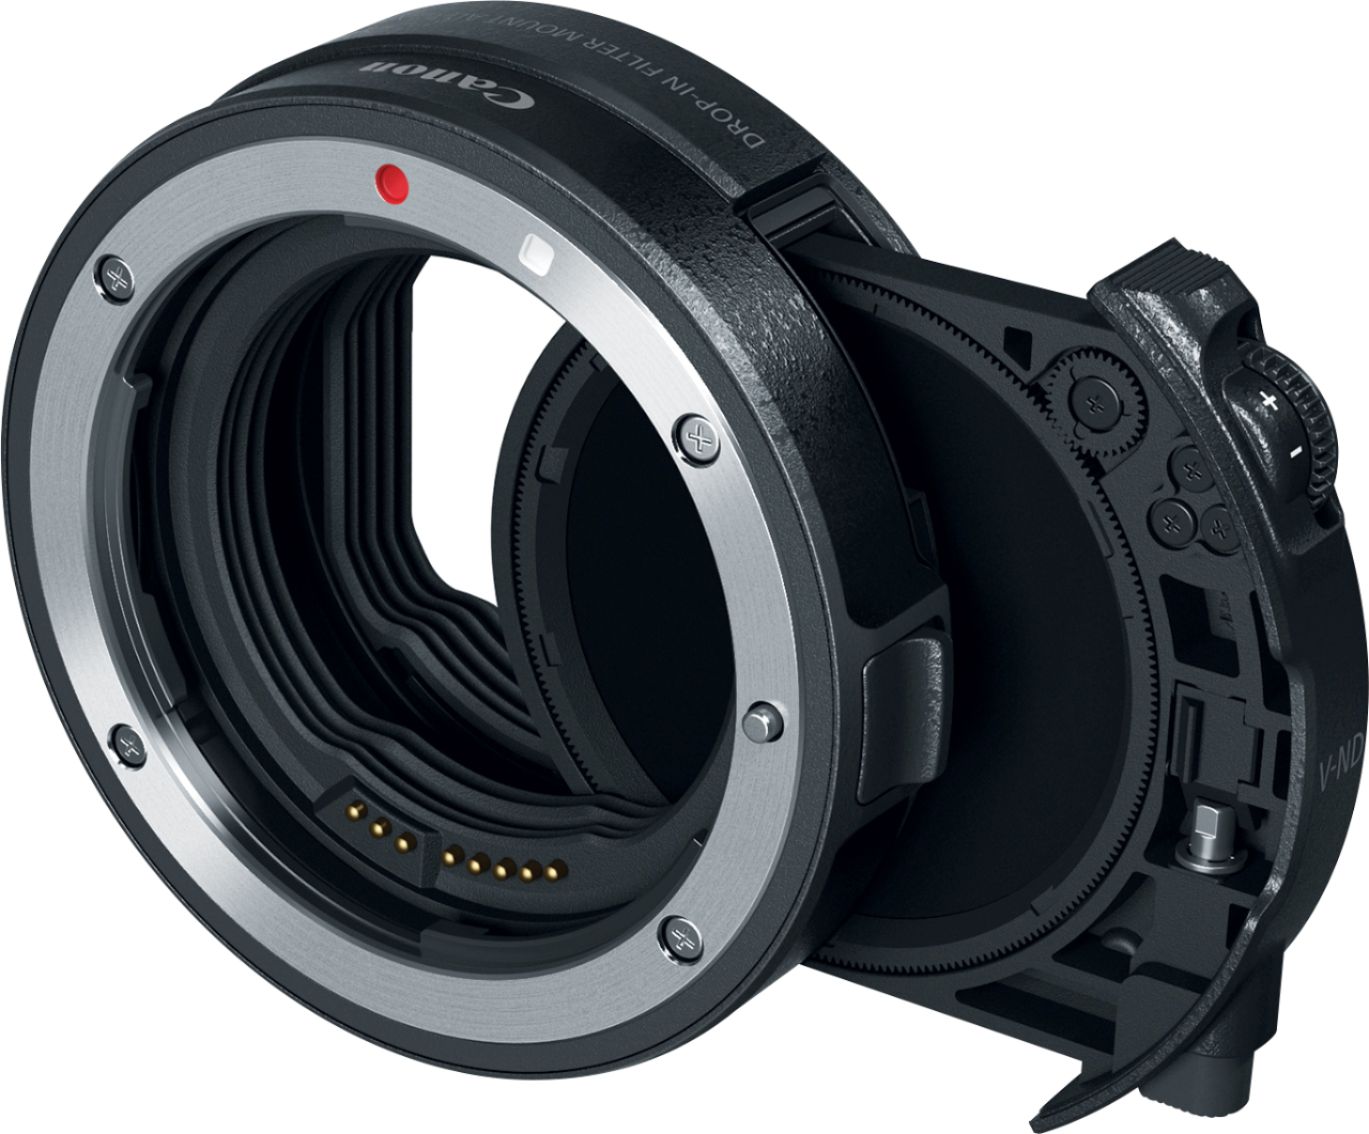 Angle View: Canon - EF-EOS R5, EOS R6, EOS R and EOS RP Drop-In Filter Lens Mount Adapter with Drop-In Variable ND Filter A